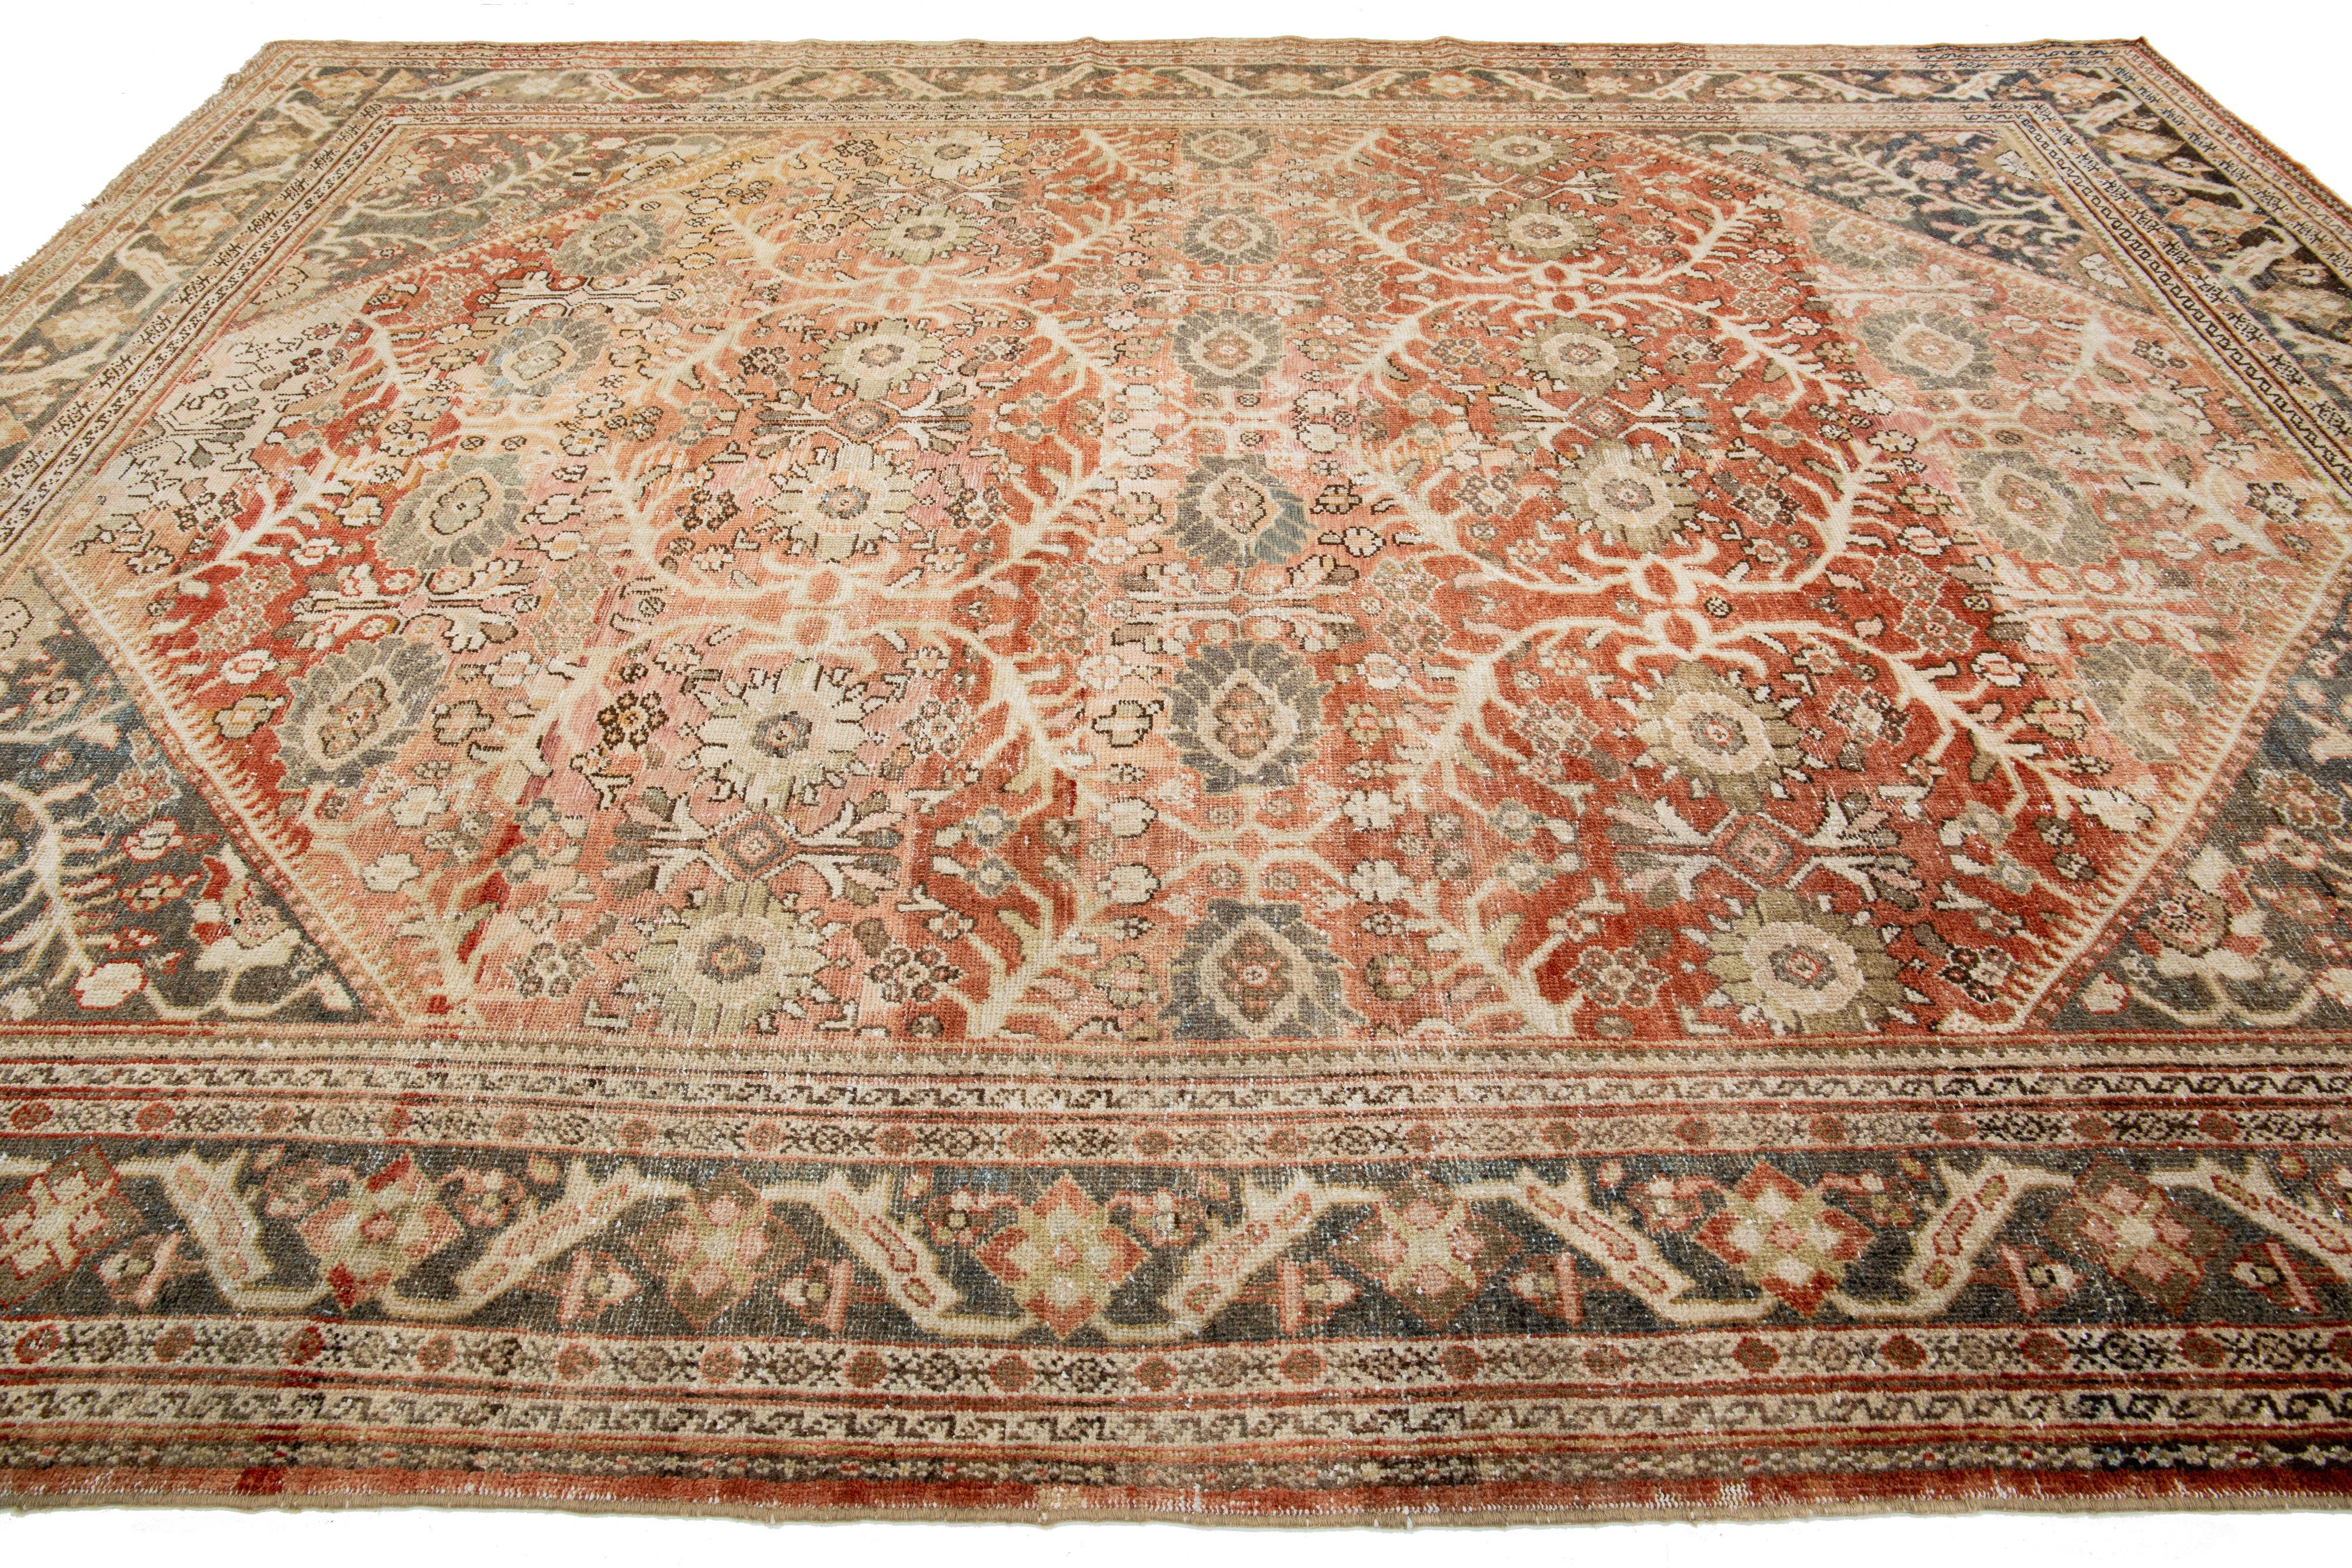 10 x 13 Antique Mahal Wool Rug In Rust Color with Allover Motif For Sale 2